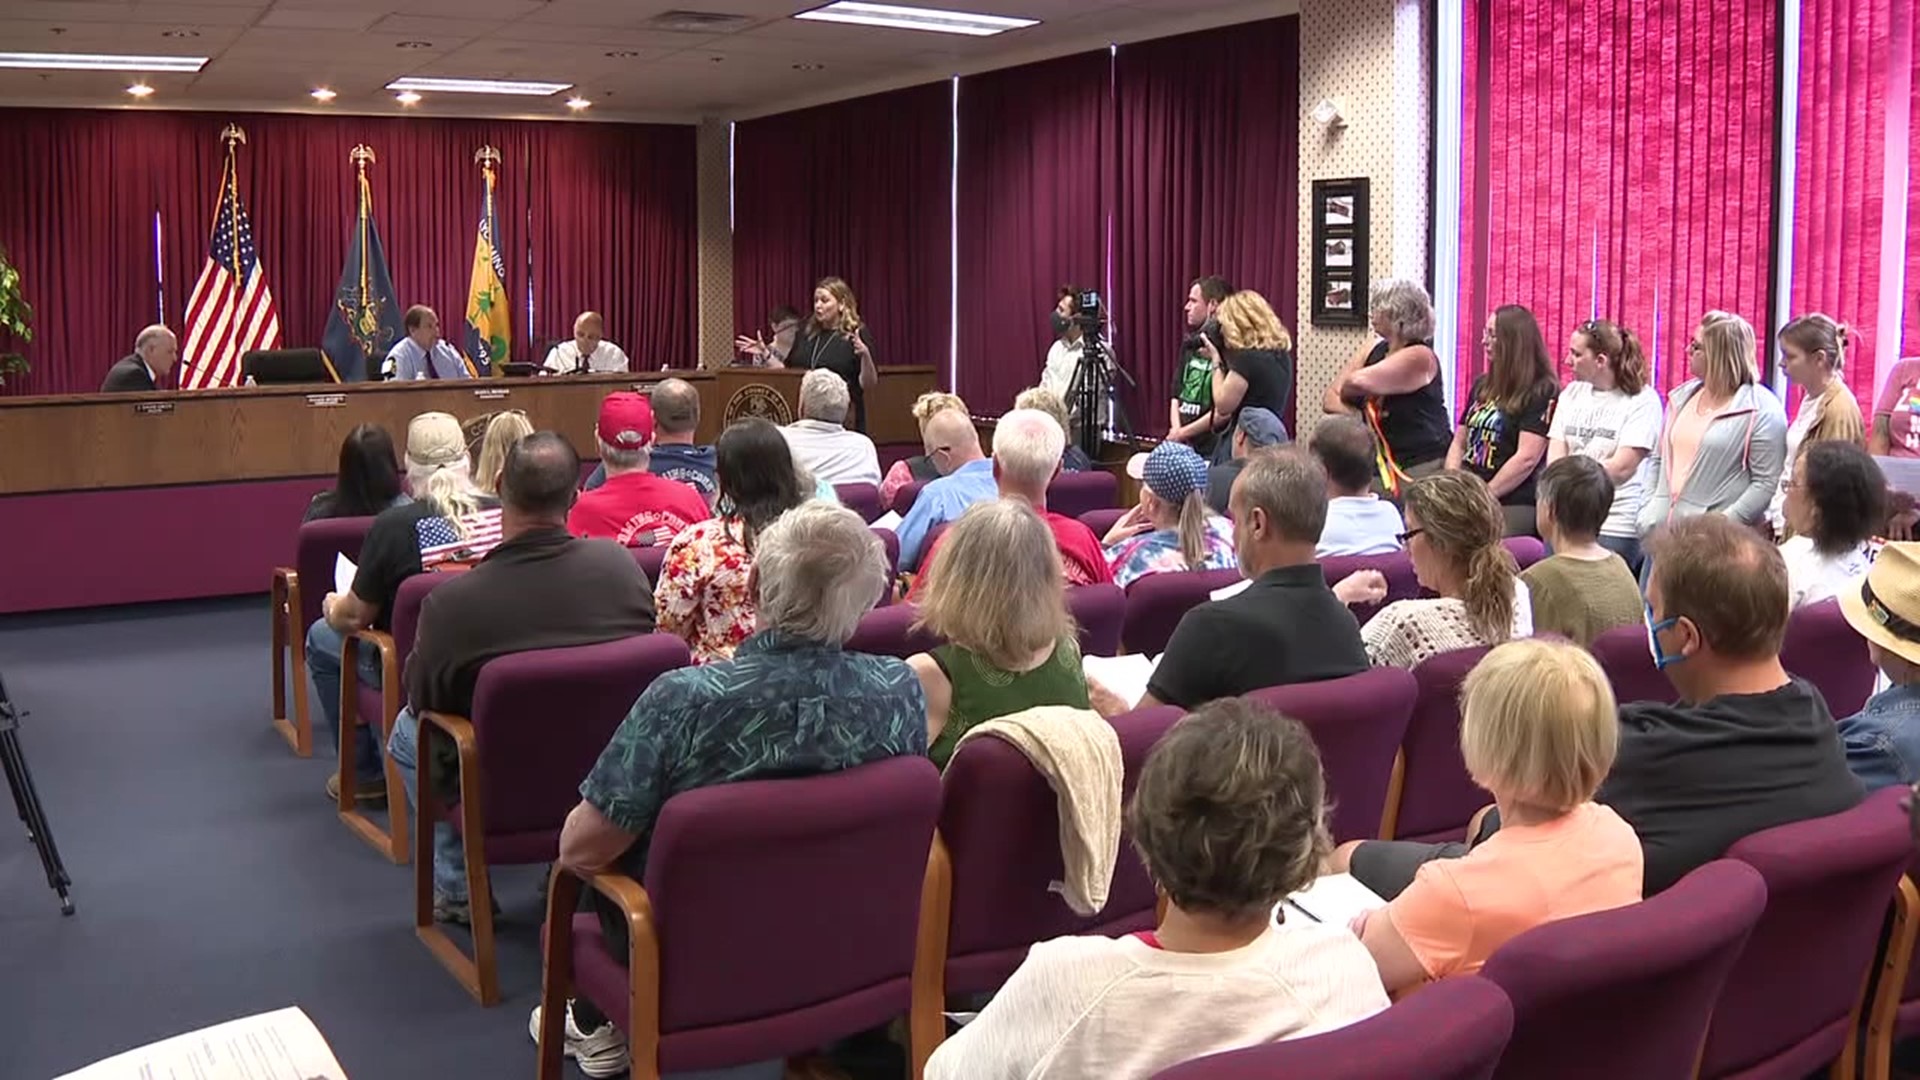 The Lycoming County commissioners held a public forum Tuesday at their weekly meeting about a Pride Month display at a local library in Williamsport.